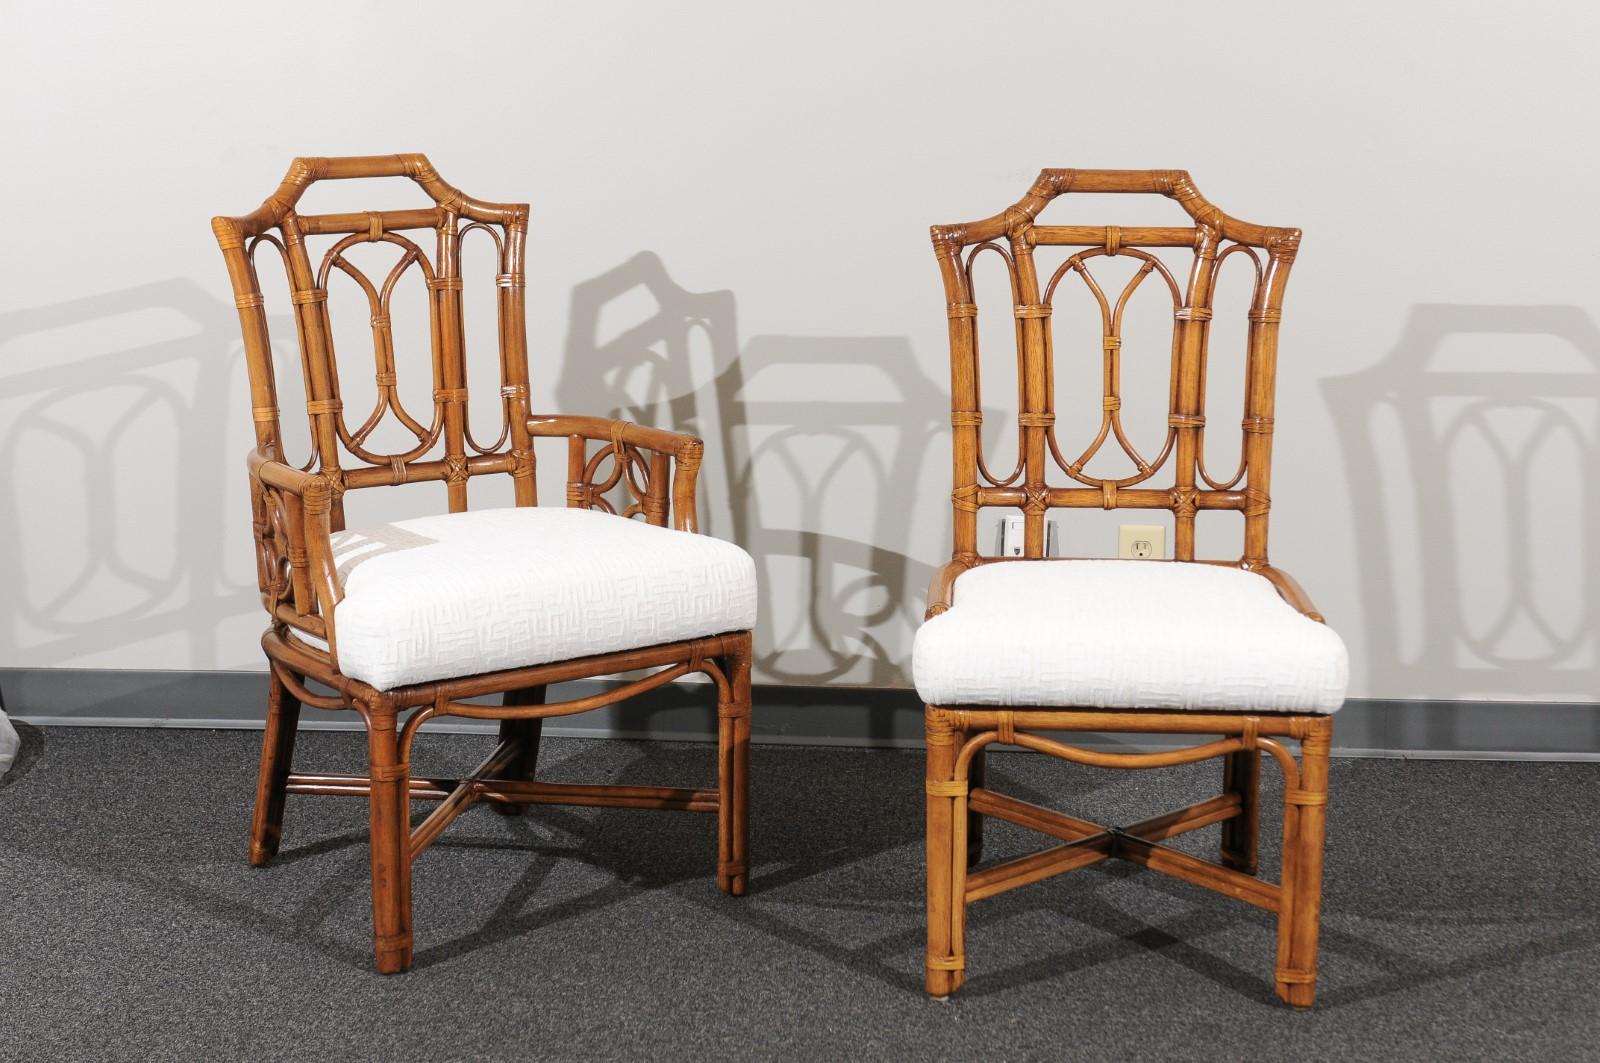 These magnificent dining chairs are shipped as professionally photographed and described in the listing narrative, completely installation ready. Expert custom upholstery service is available.

A radiant restored set of eight (8) dining chairs